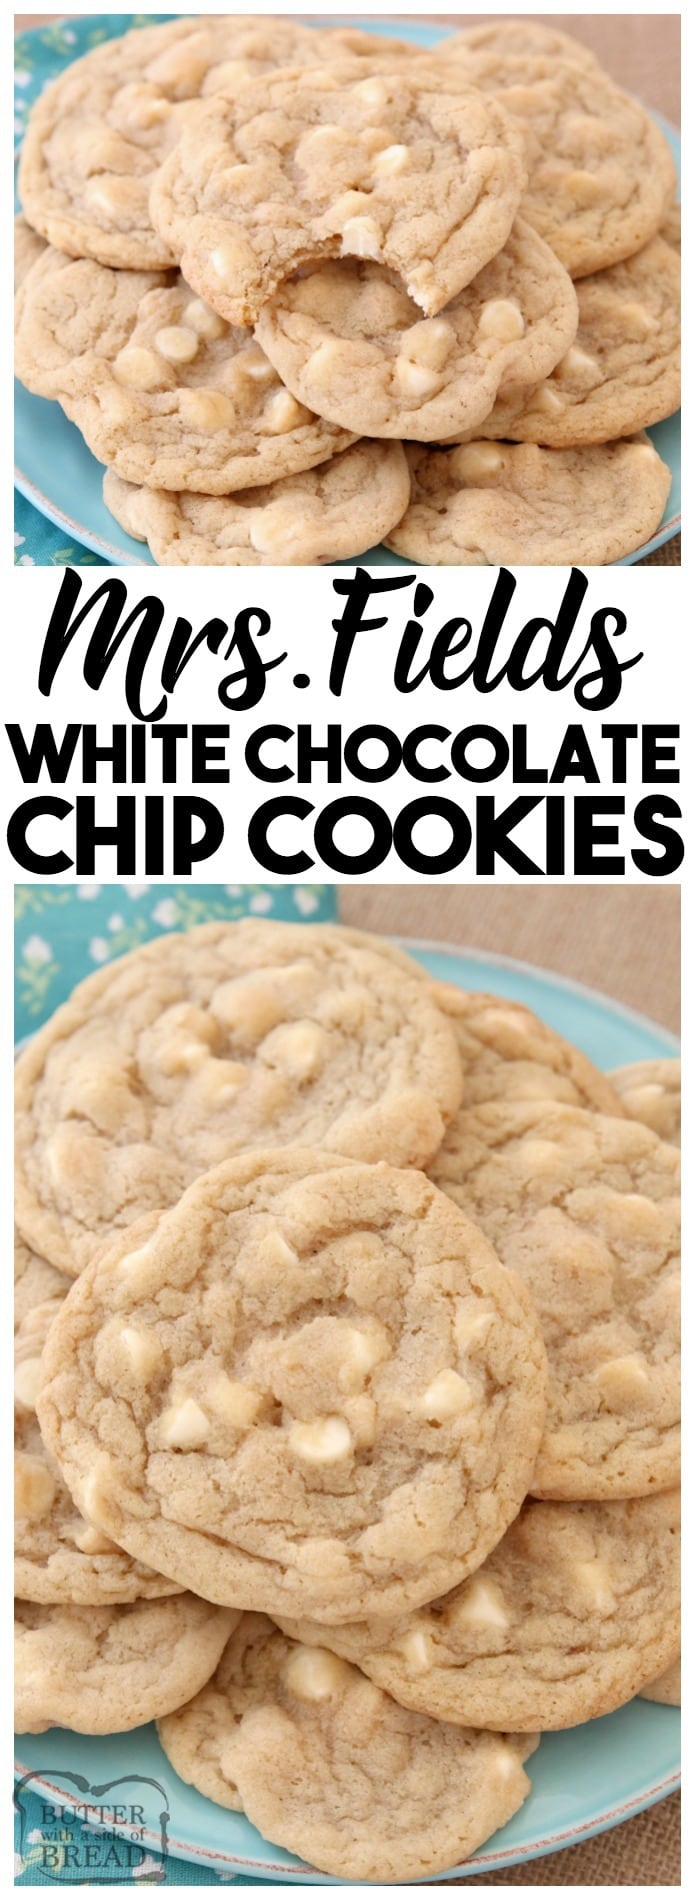 Mrs.Fields White Chocolate Chip Cookies are soft, delicious cookies filled with sweet white chocolate chips. Copycat Mrs.Field's cookie recipe that everyone can make at home! White Chocolate Chip Cookies recipe from Butter With A Side Of Bread